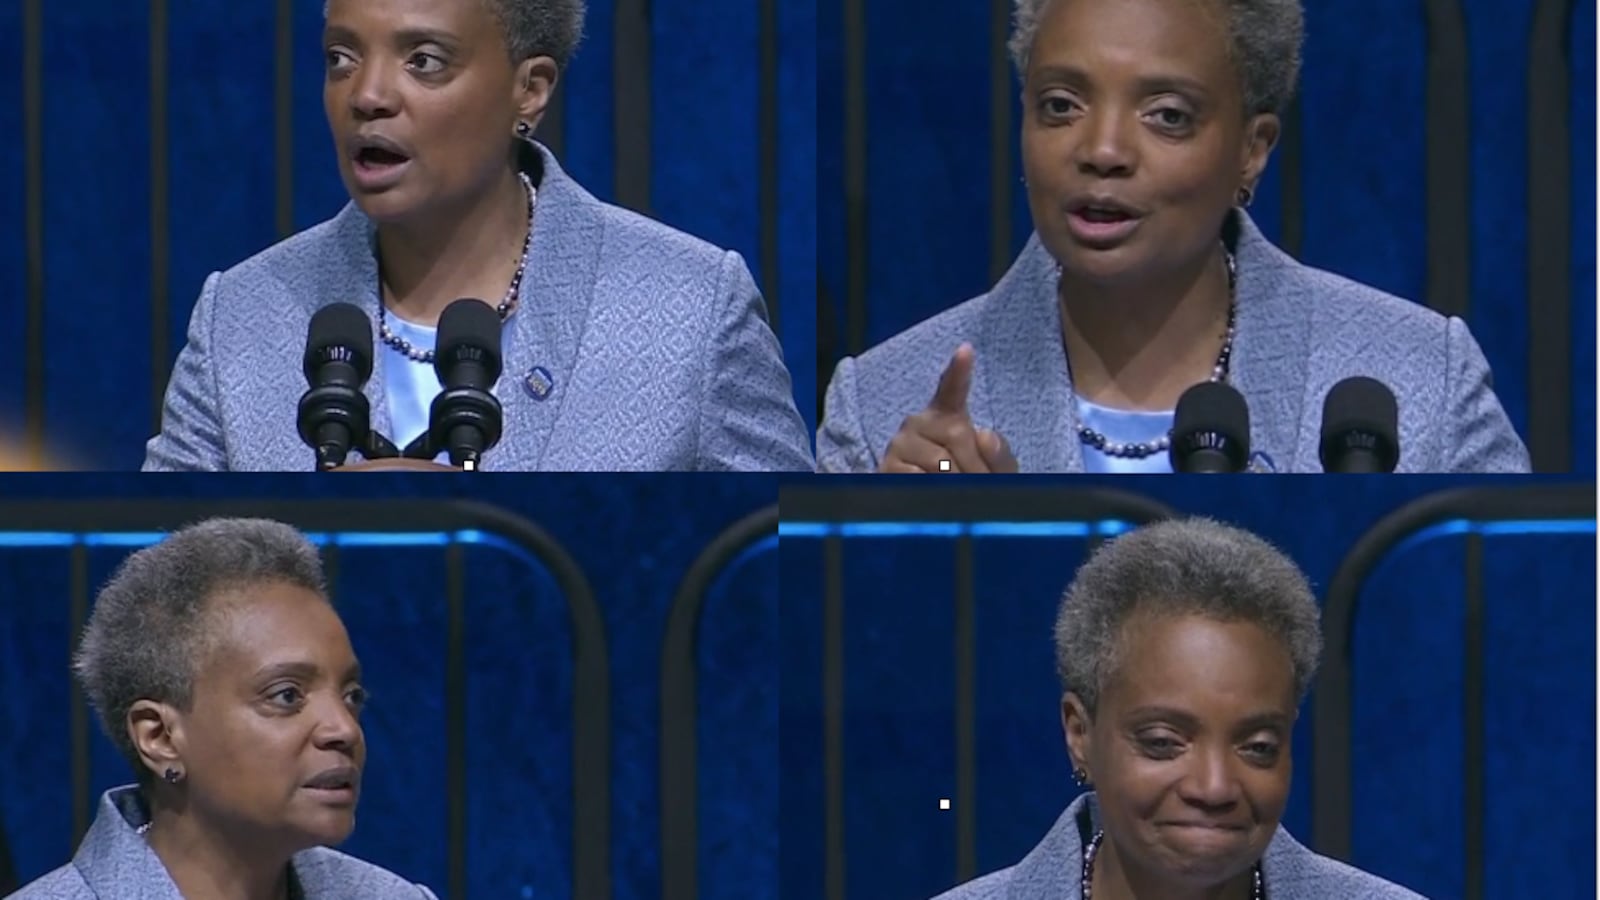 Lori Lightfoot spoke extensively about education during her inaugural address as Chicago's mayor on May 20, 2019.